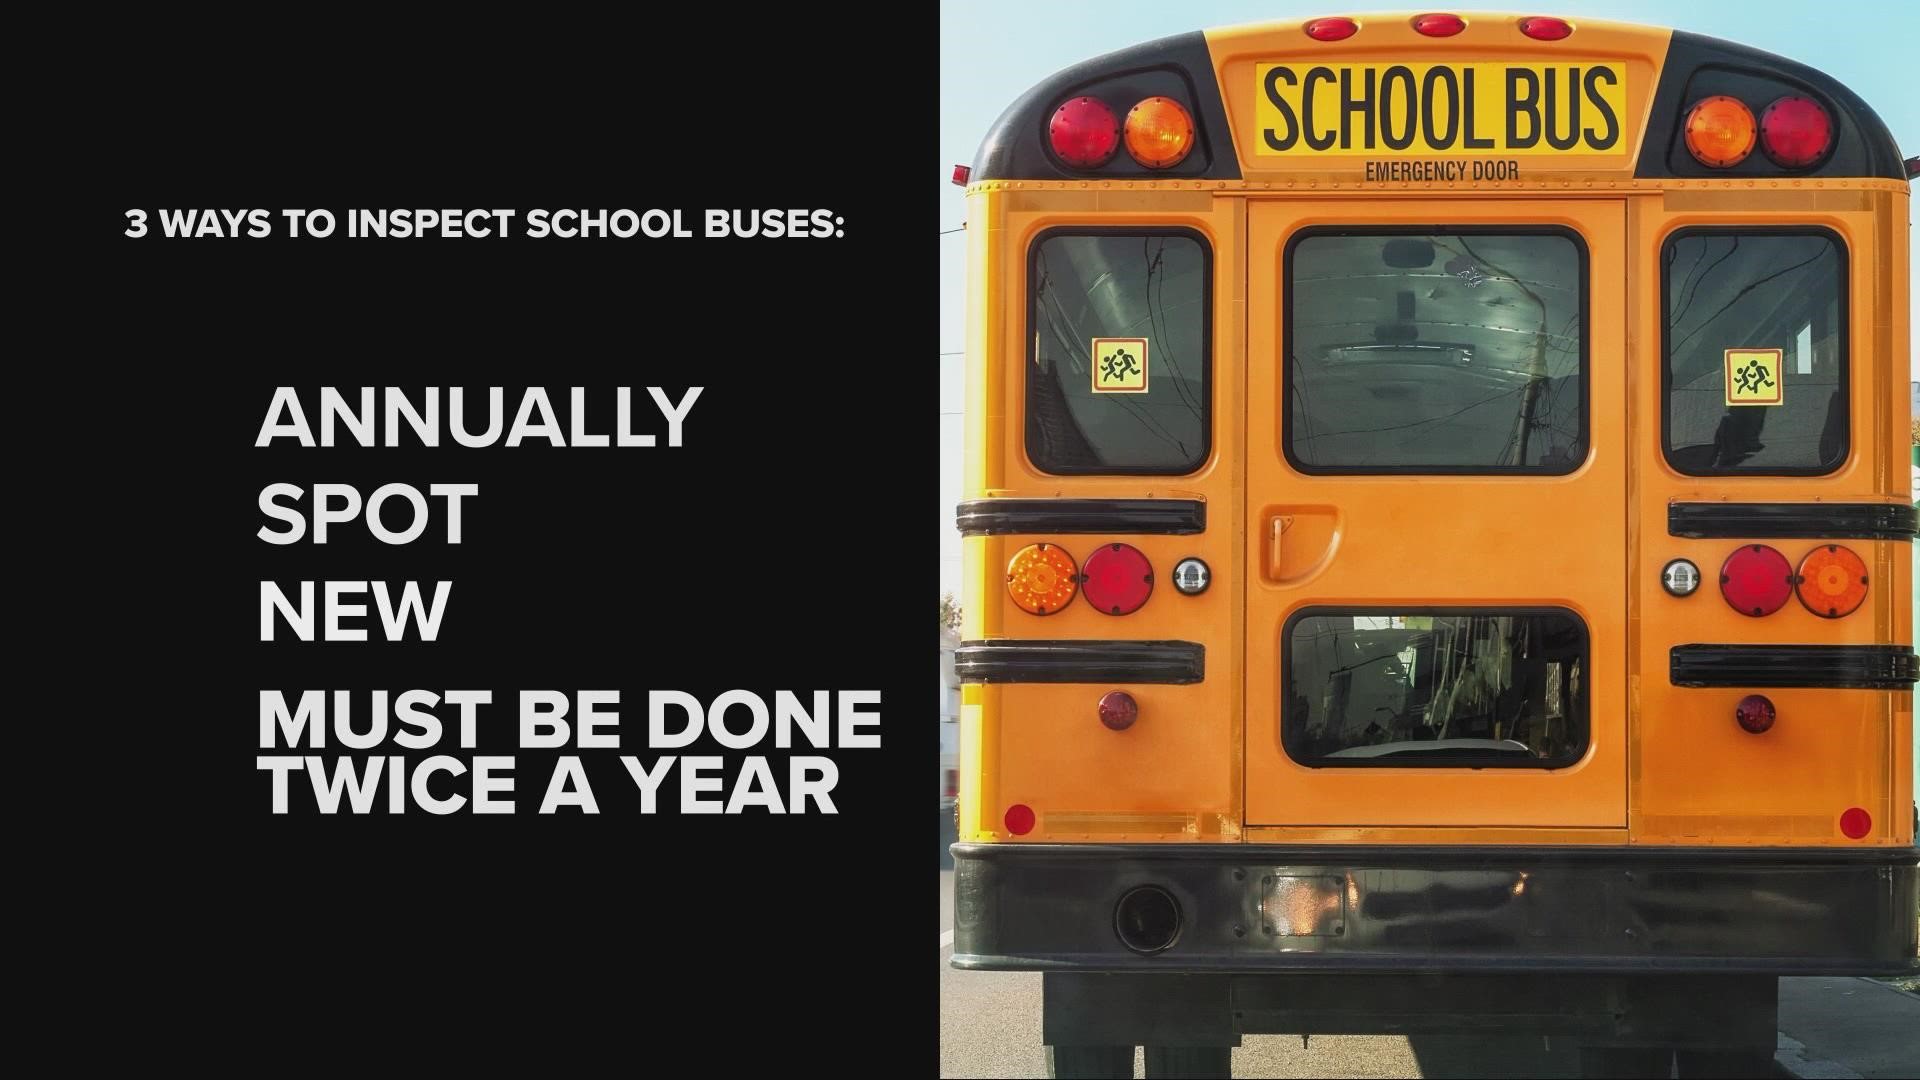 3News obtained dozens of state bus inspections for Northeast Ohio school districts, finding many fleets don’t have passing grades.